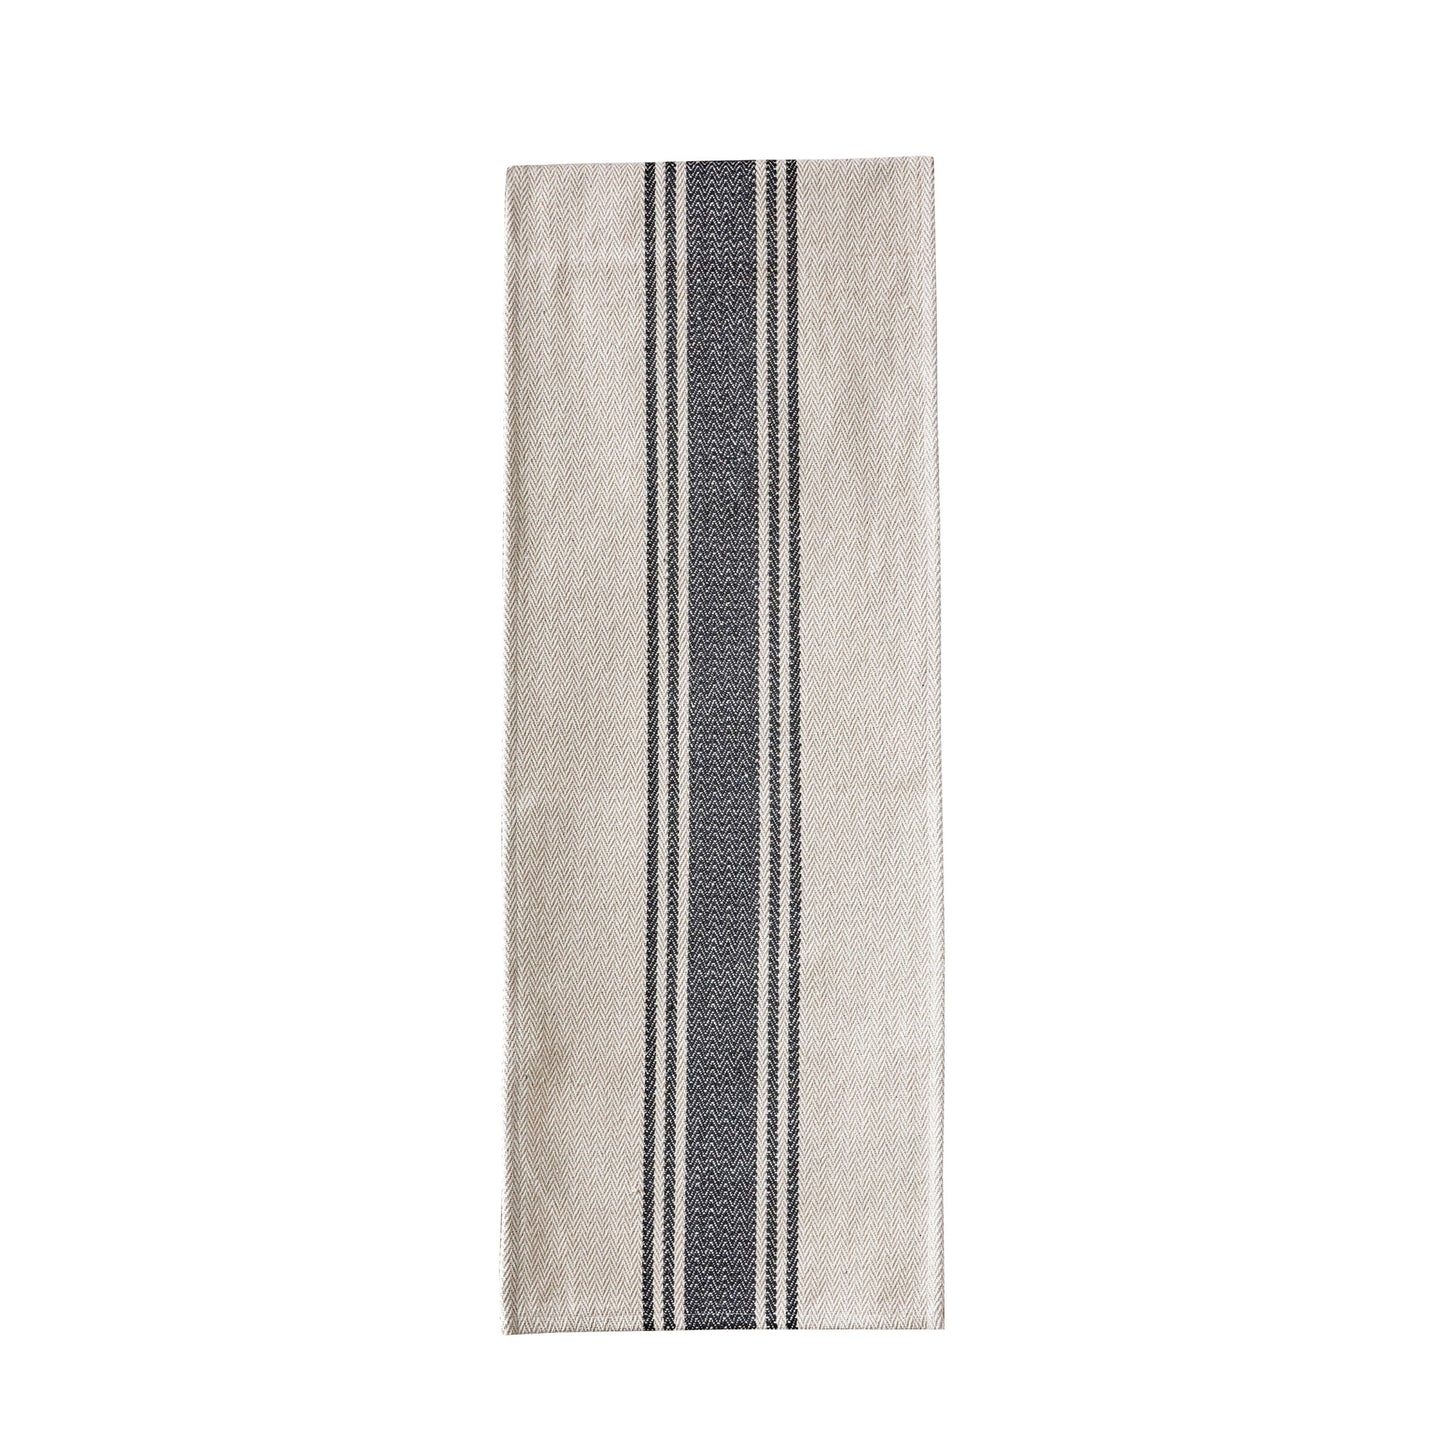 Woven cotton cream table runner with black stripes